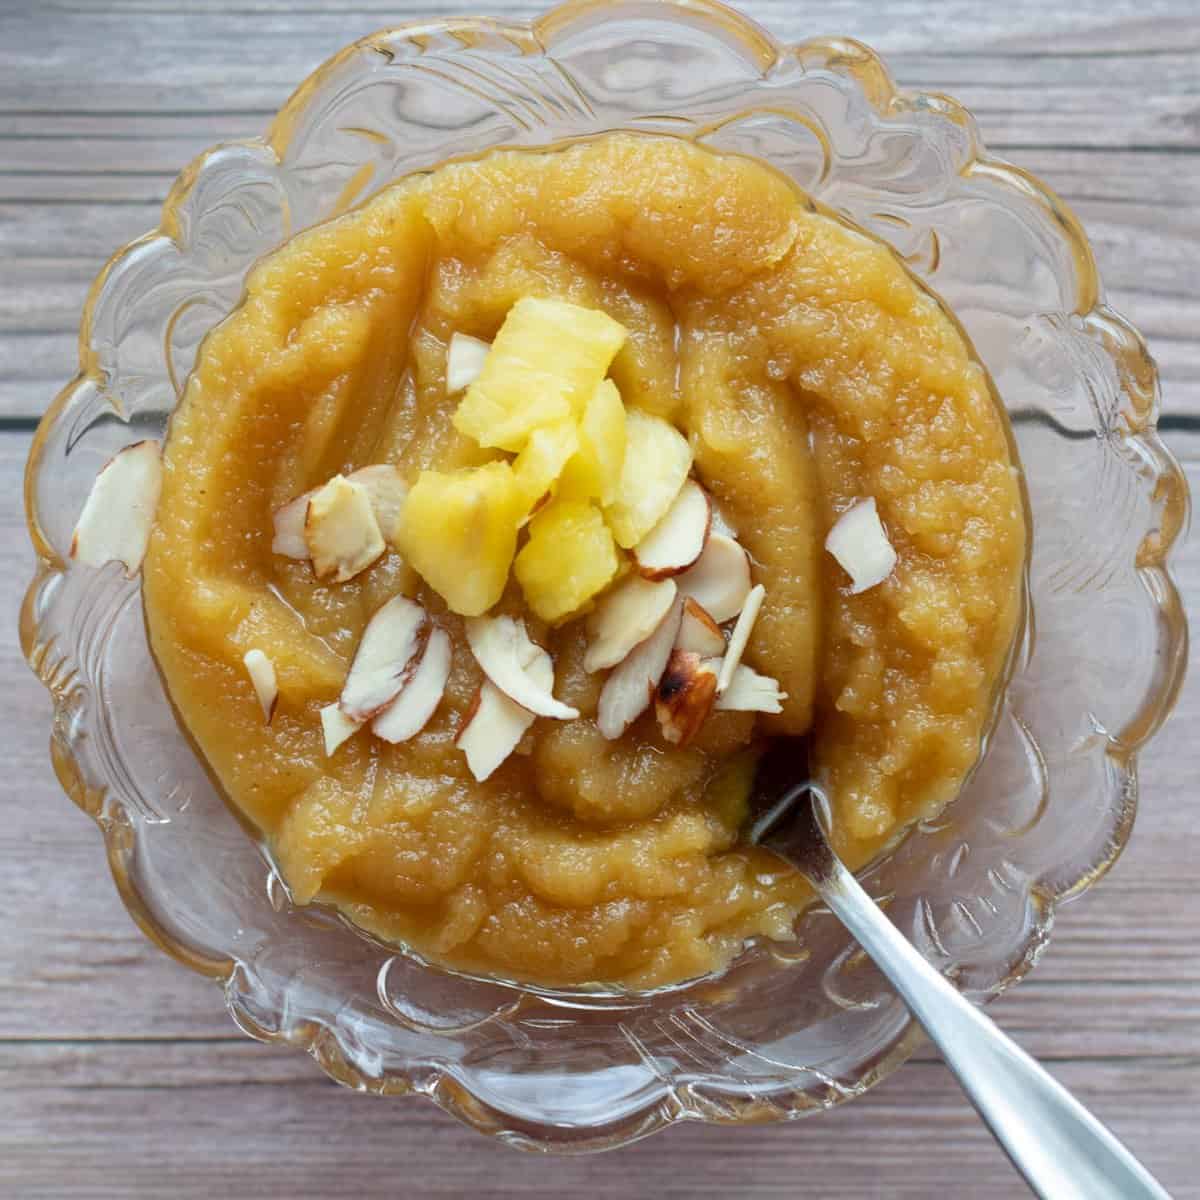 Almond pineapple halwa served in a glass bowl with a dessert spoon and pineapple pieces and almond pieces garnished on top